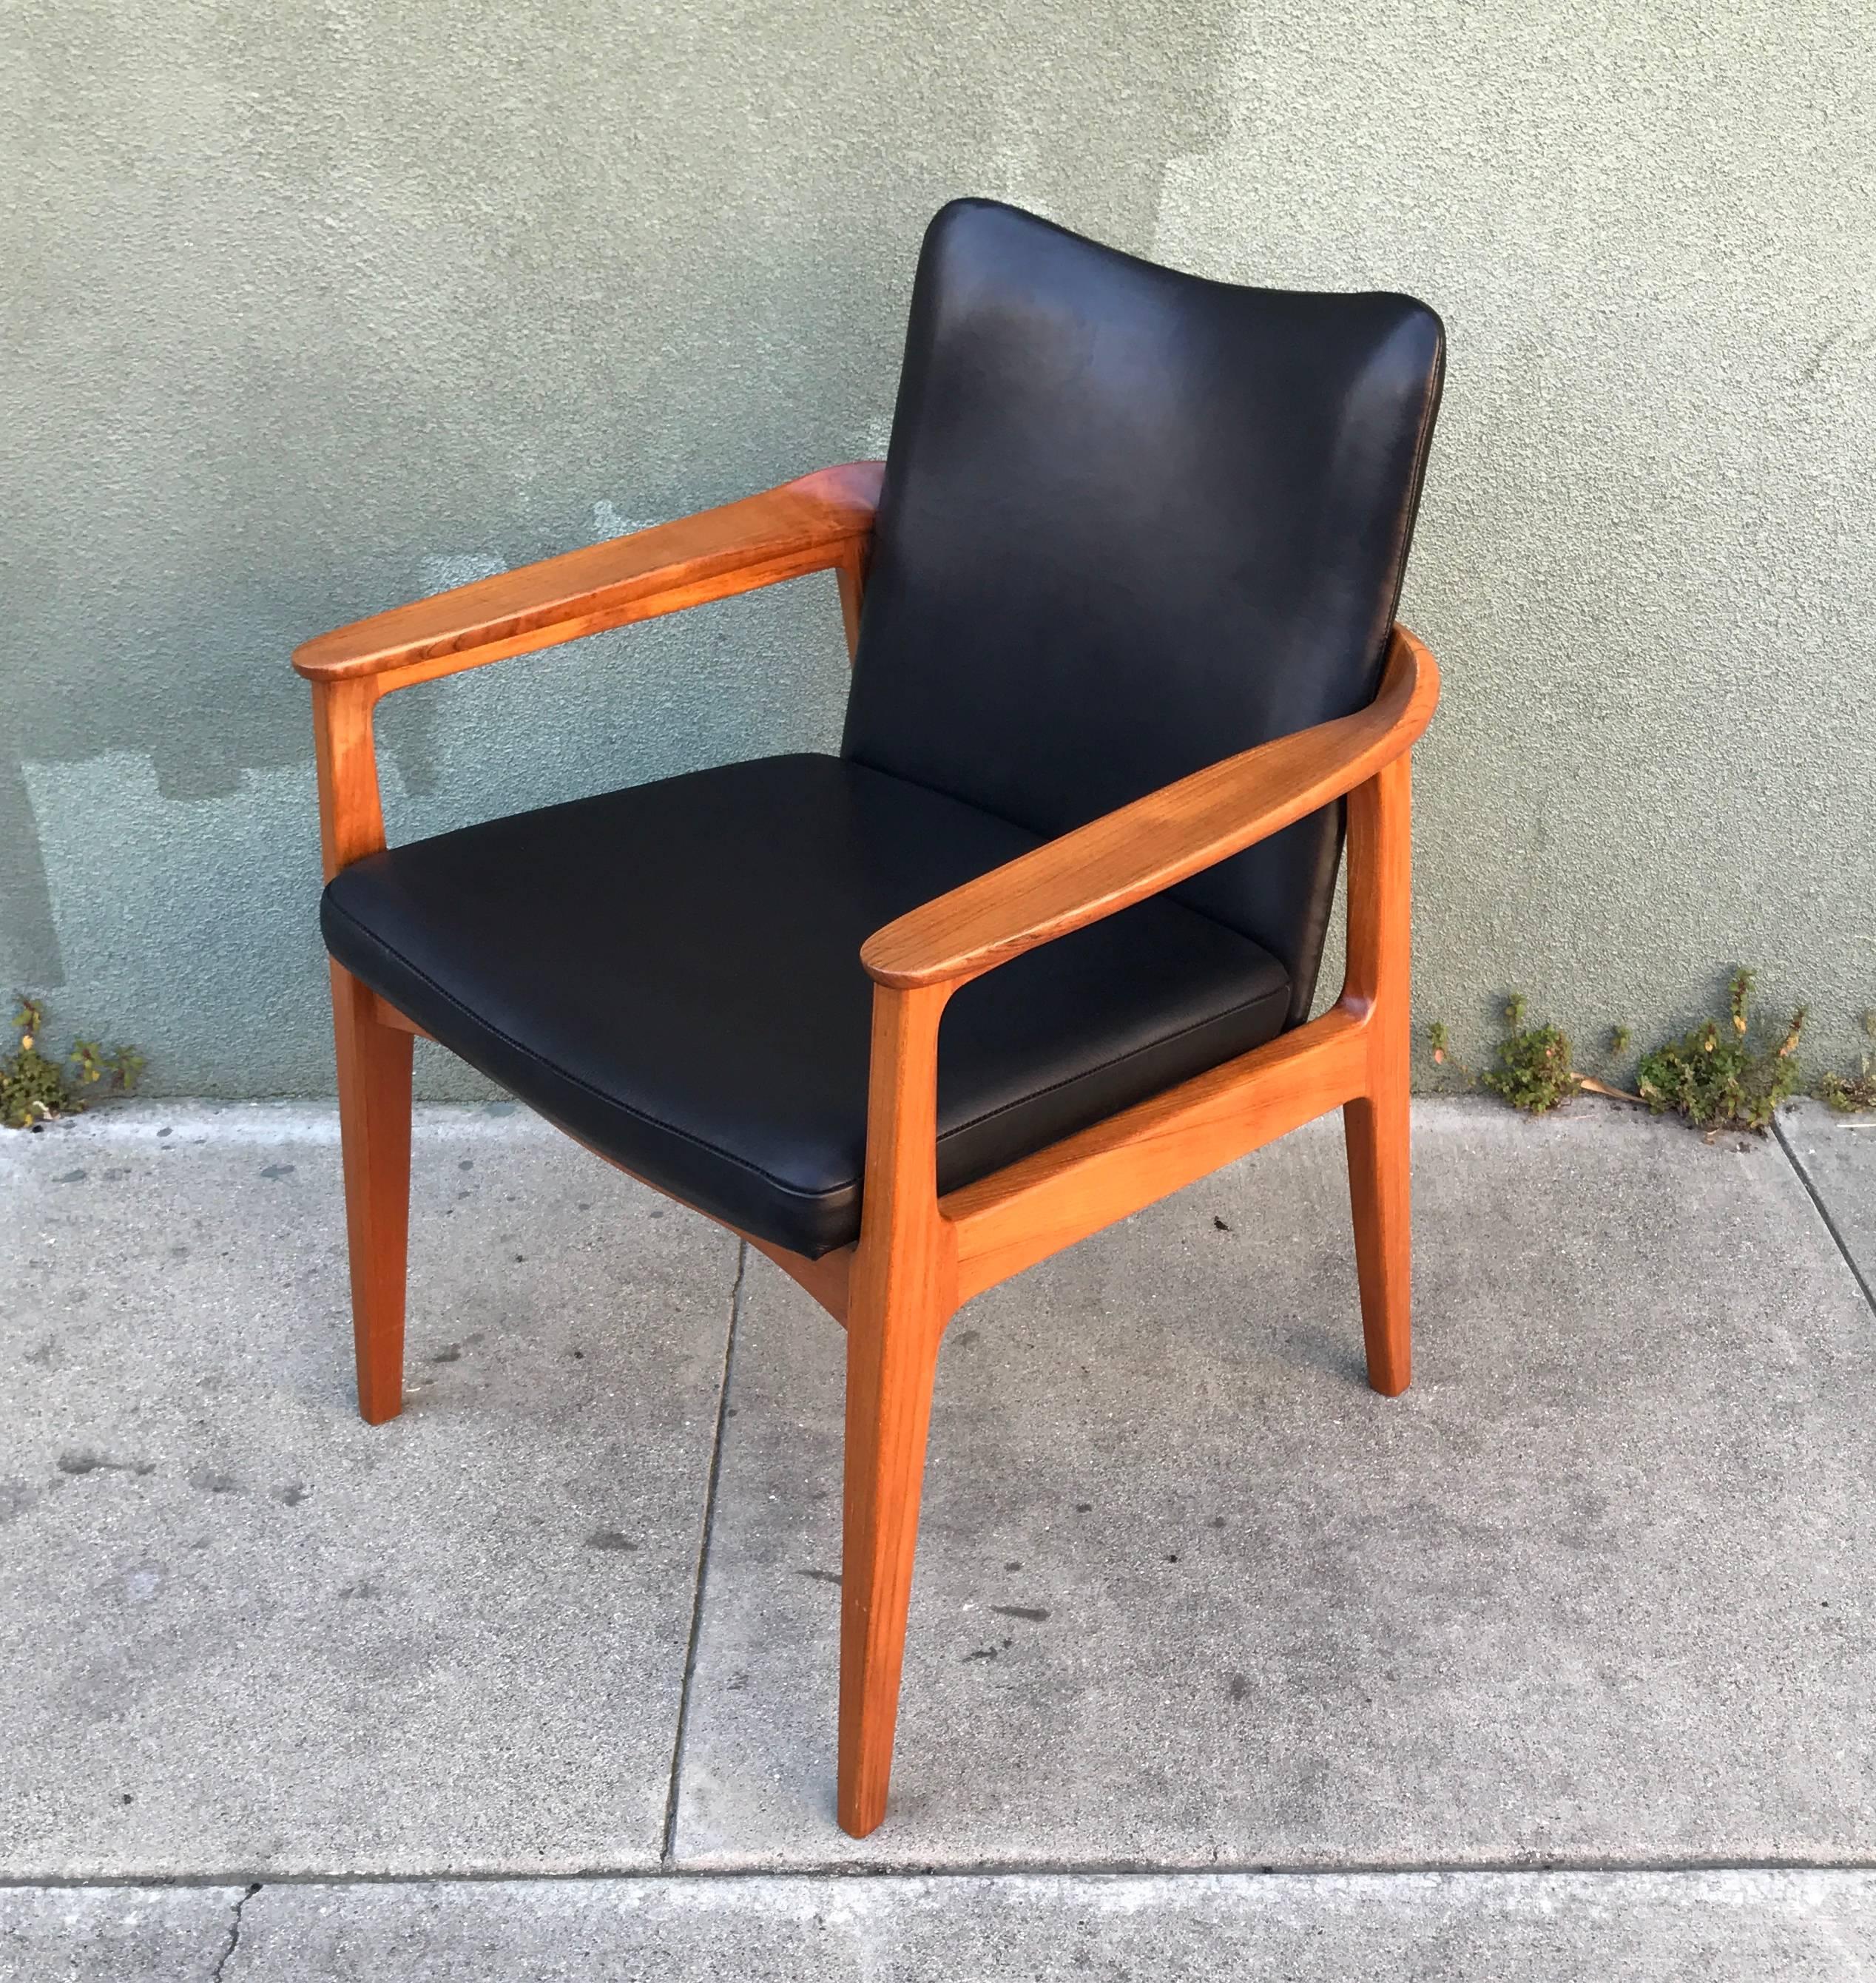 The Count Sigvard Bernadotte designed teak armchair, crafted by France and Son in Denmark and imported by John Stuart Inc of New York. Solid teak frame the has been restored along with premium leather upholstery for a full restoration. Labeled with